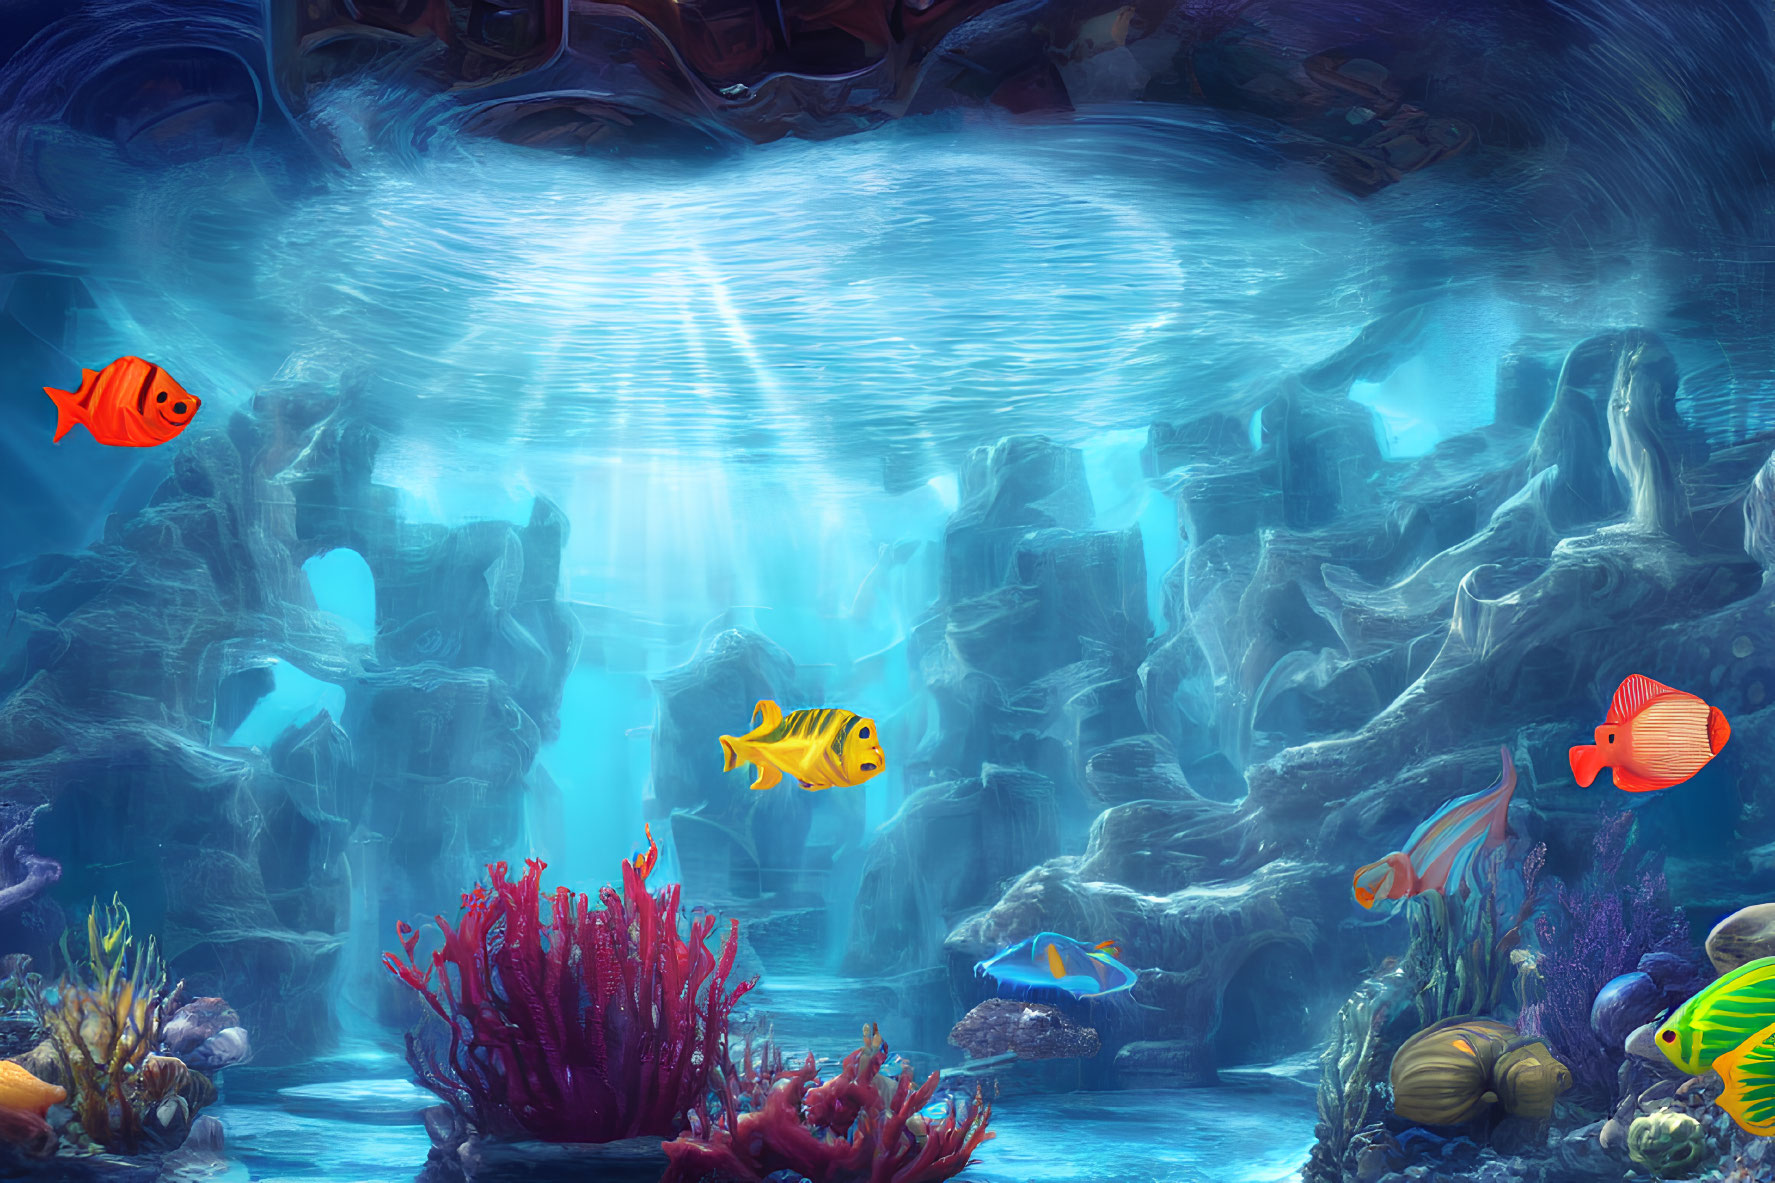 Colorful Fish Swimming in Underwater Coral Reef Scene